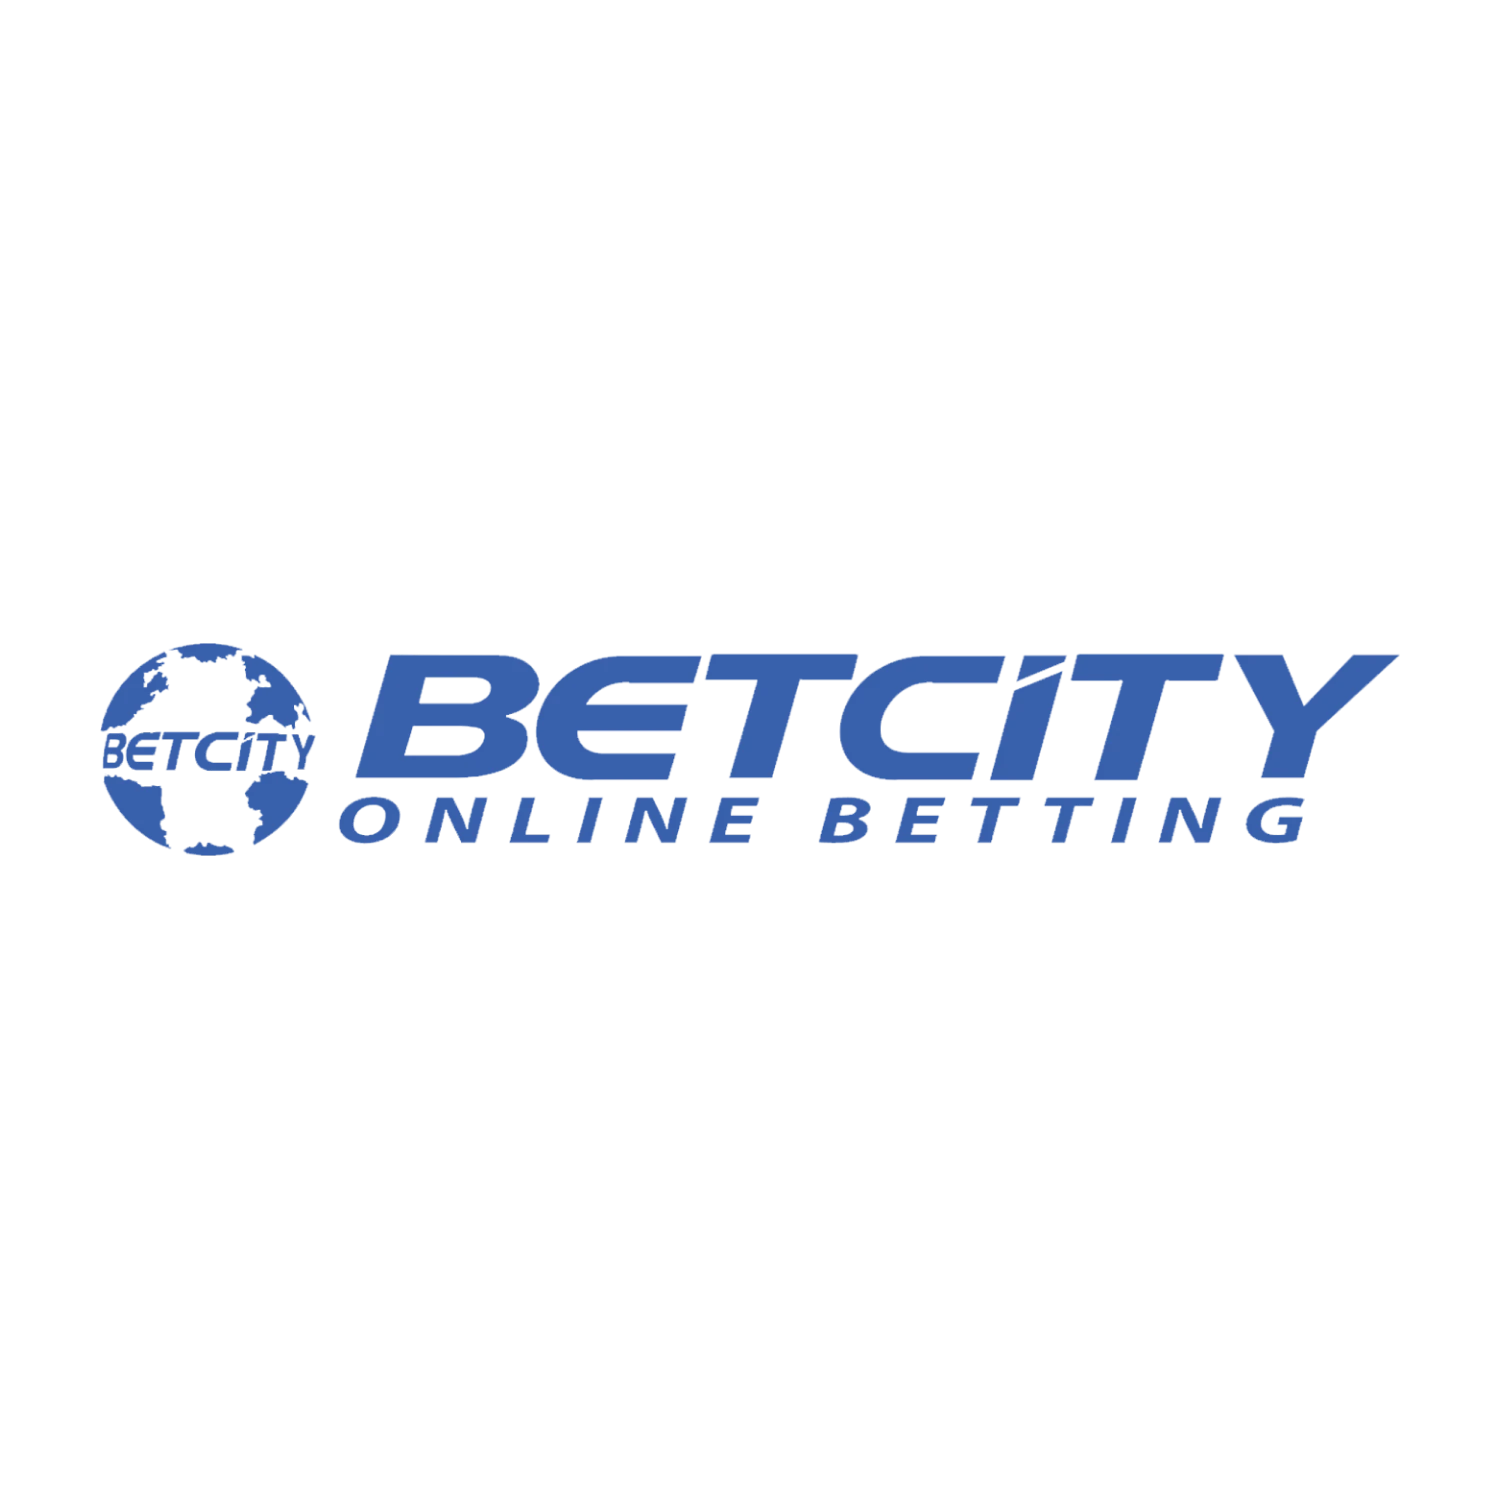 Learn how to place bets on sports and esports matches on the Betcity site and in its apps.